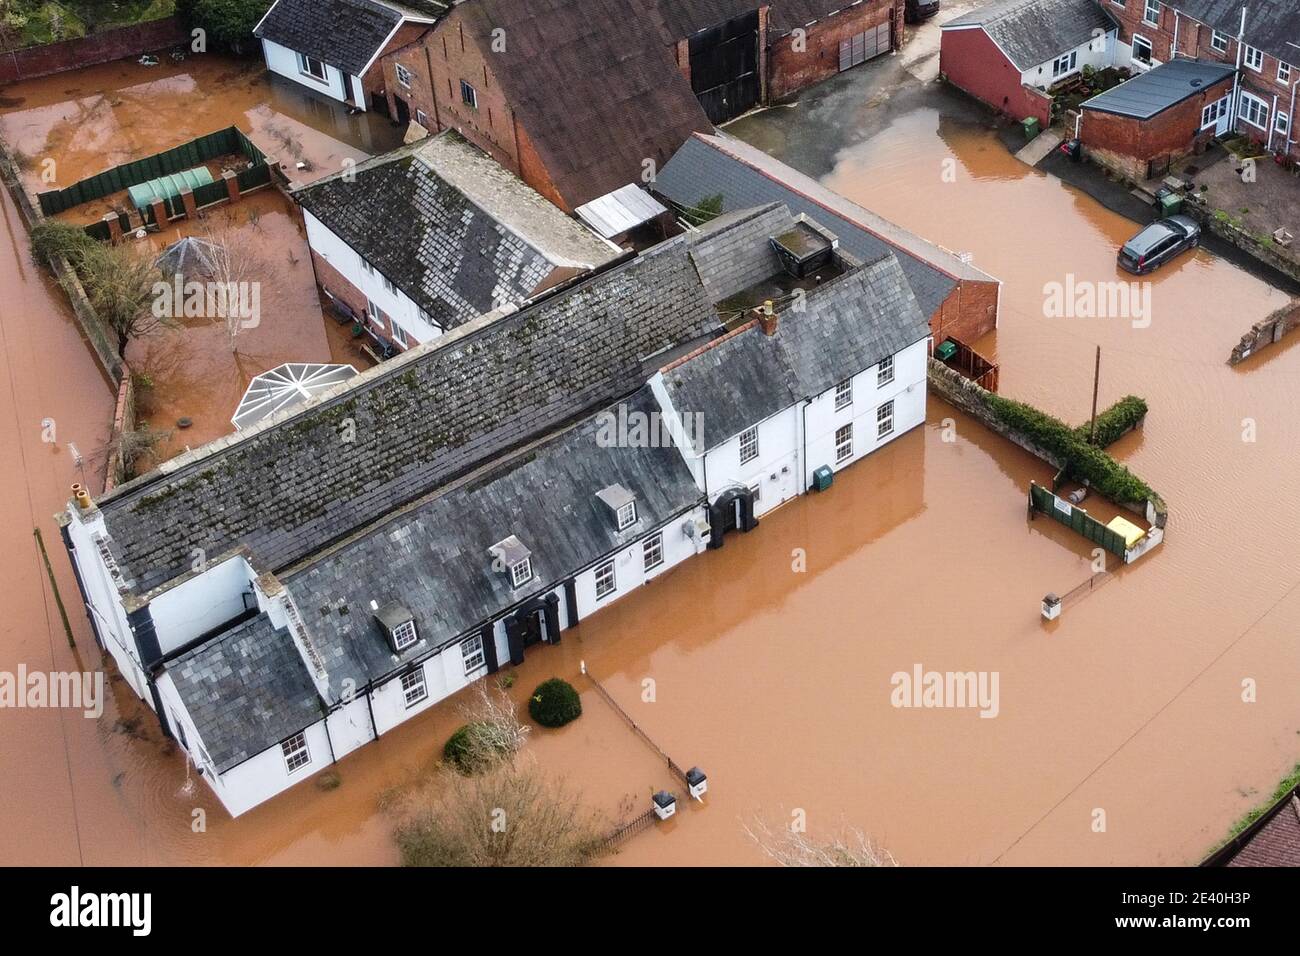 Hereford, Herefordshire, UK. 21st Jan, 2021. Flooding hit parts of Hereford today after Storm Christoph brought heavy rain to the region. The River Wye burst its banks completely flooding Home Lacy Road with only a Kayaker being able to negotiate the road turned river. Pic by Credit: Sam Holiday/Alamy Live News Stock Photo